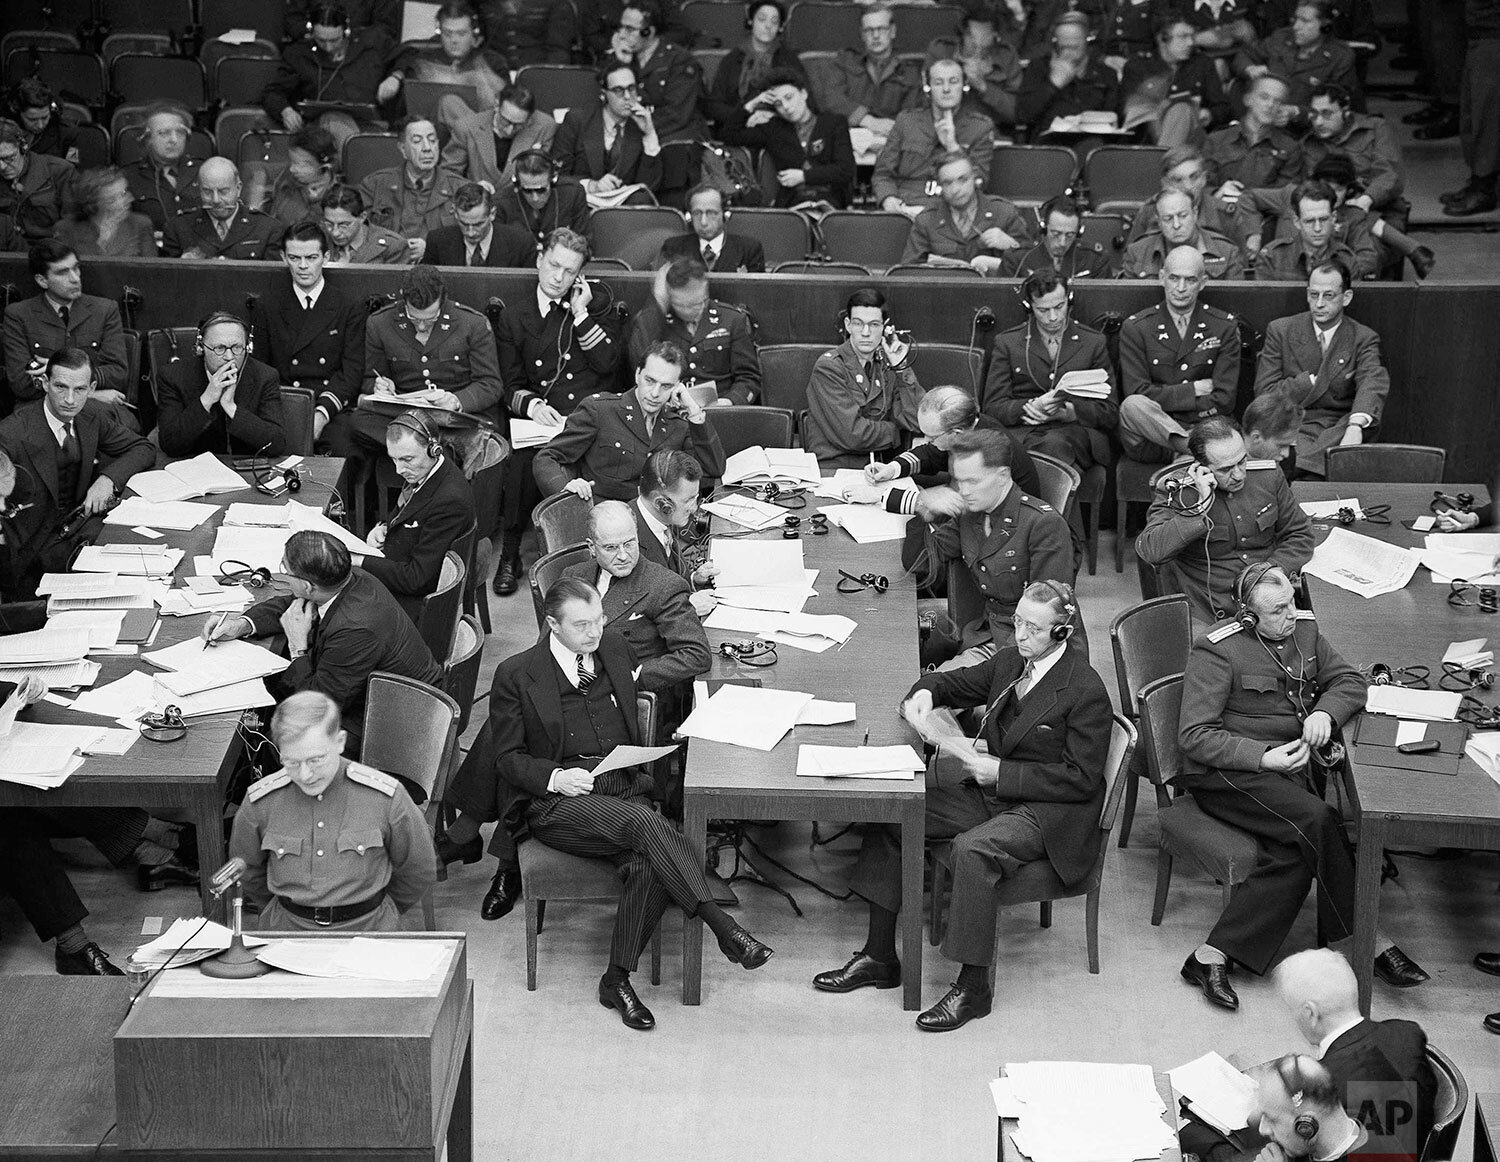  The Russian assistant prosecutor reads the indictment, (lower left) in Nuremberg, Germany on Nov. 28, 1945. The American prosecutors sit at the center table nearest the camera. Left is Justice Robert Jackson and, right, his assistant. Far, left, are